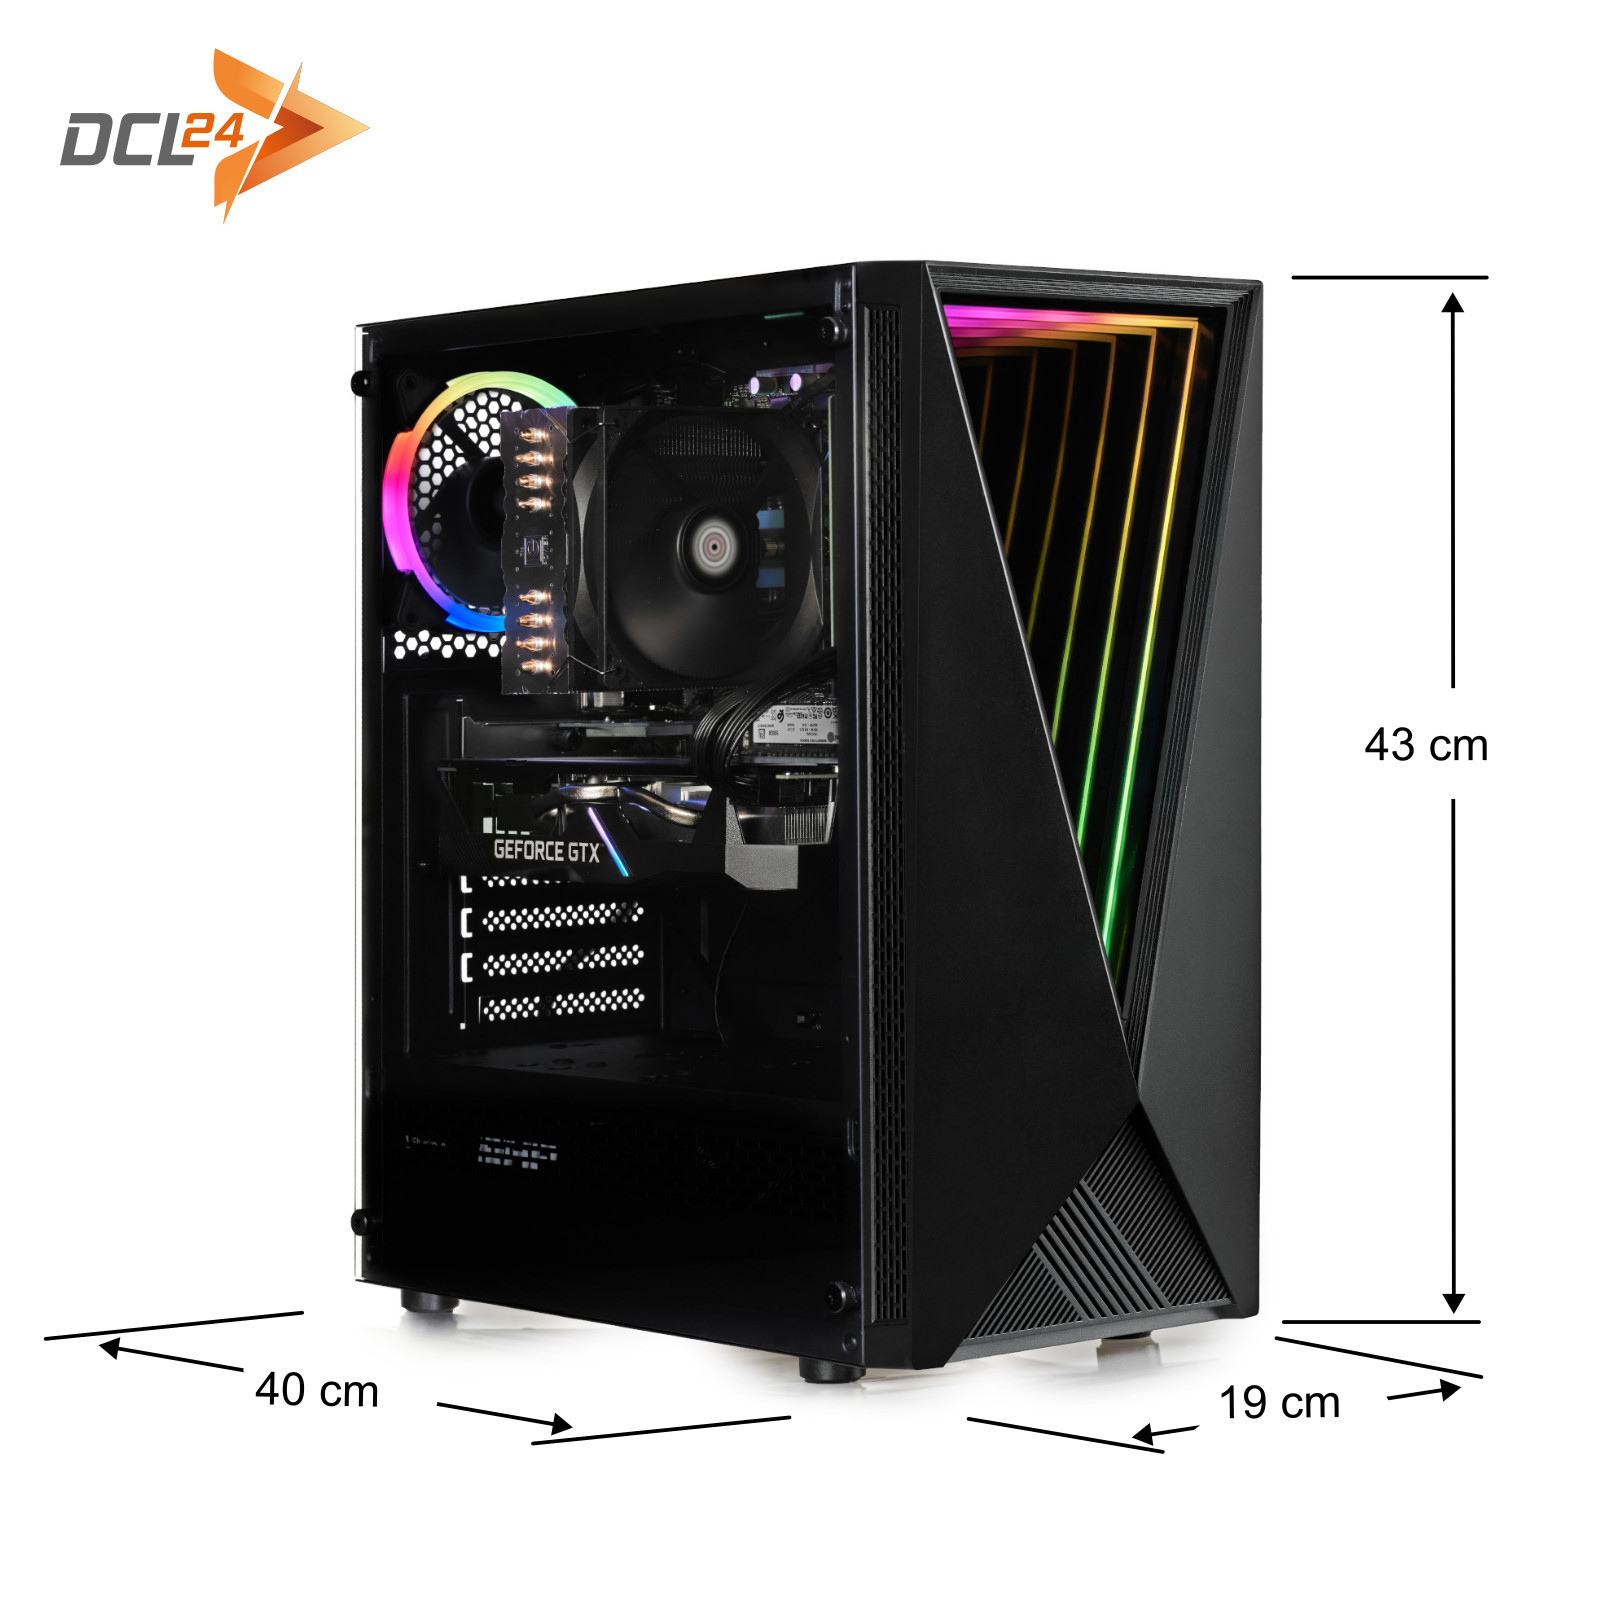 Void, 1000 GB GB DCL24 16 Gaming RAM, SSD PC,